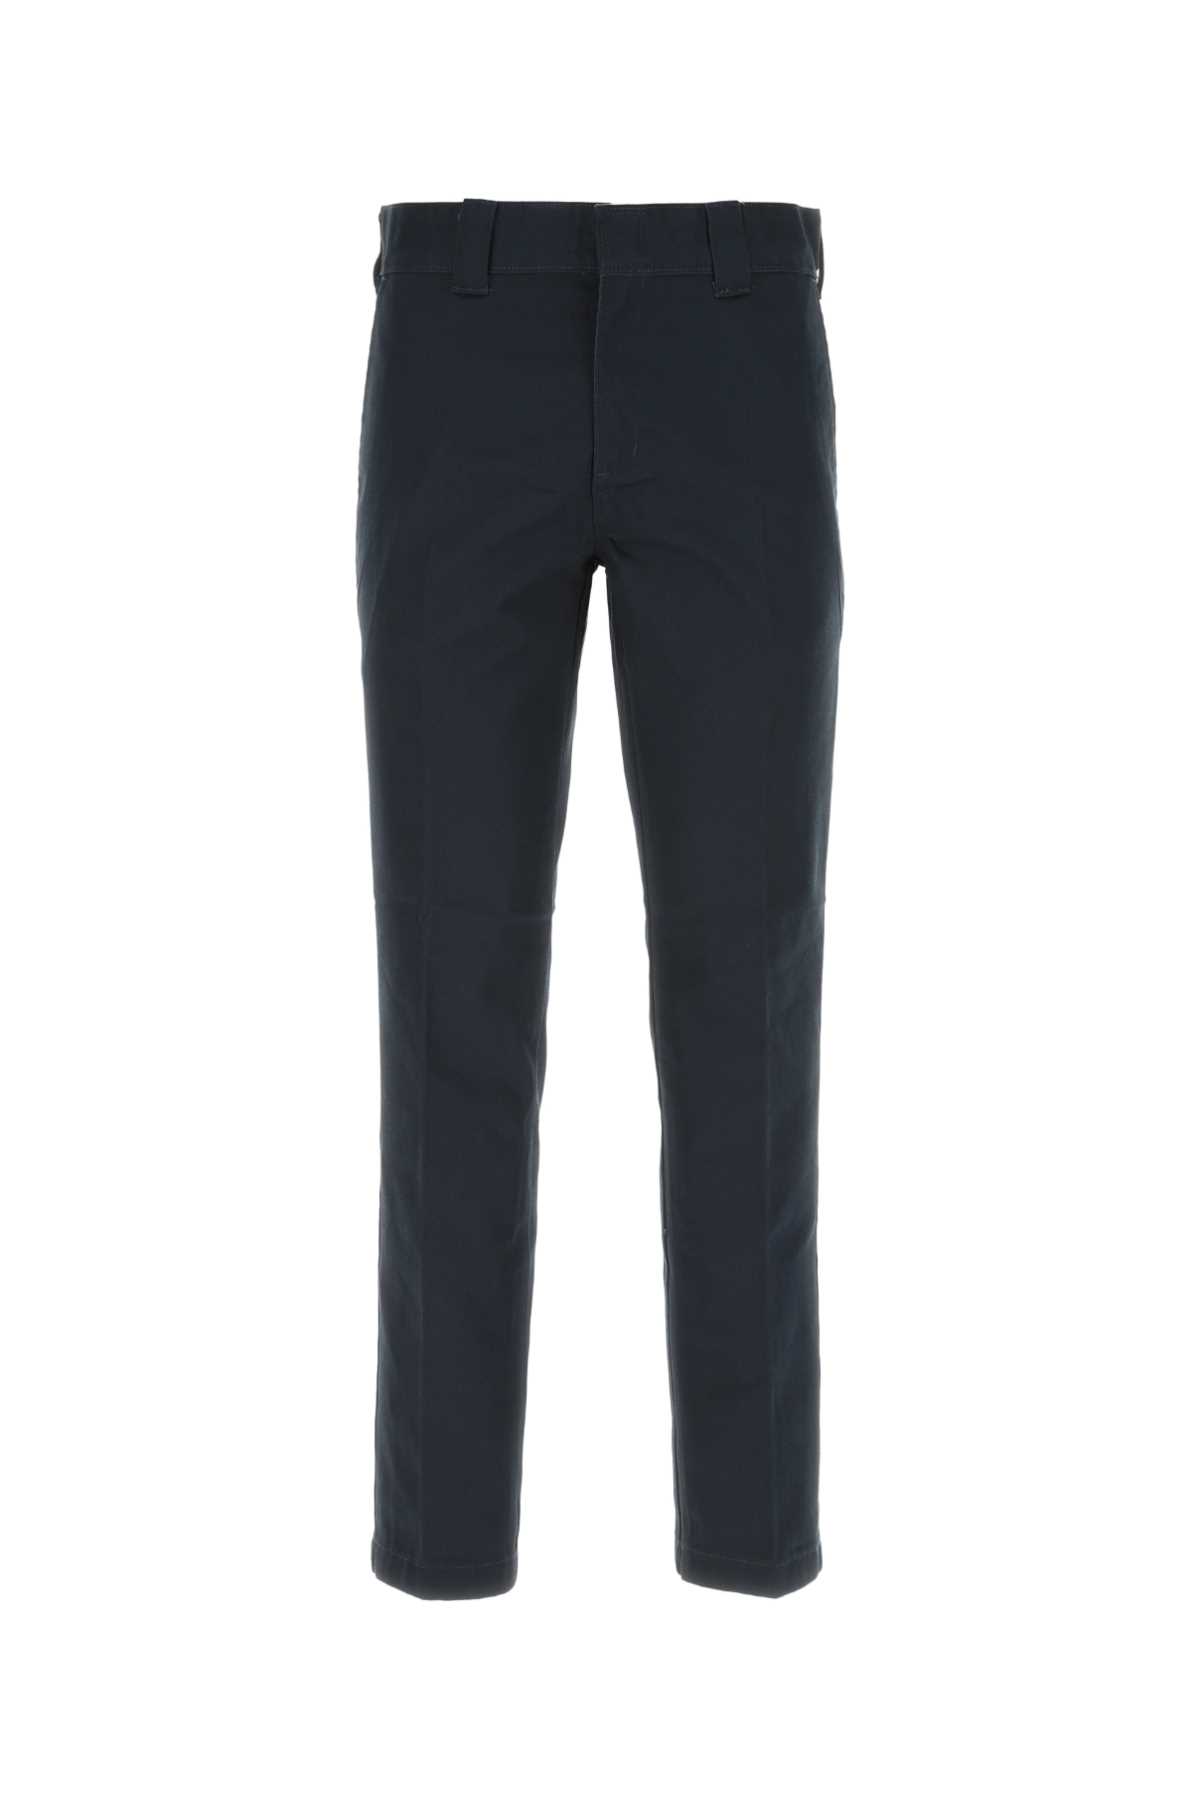 Midnight Blue Polyester Blend Pant